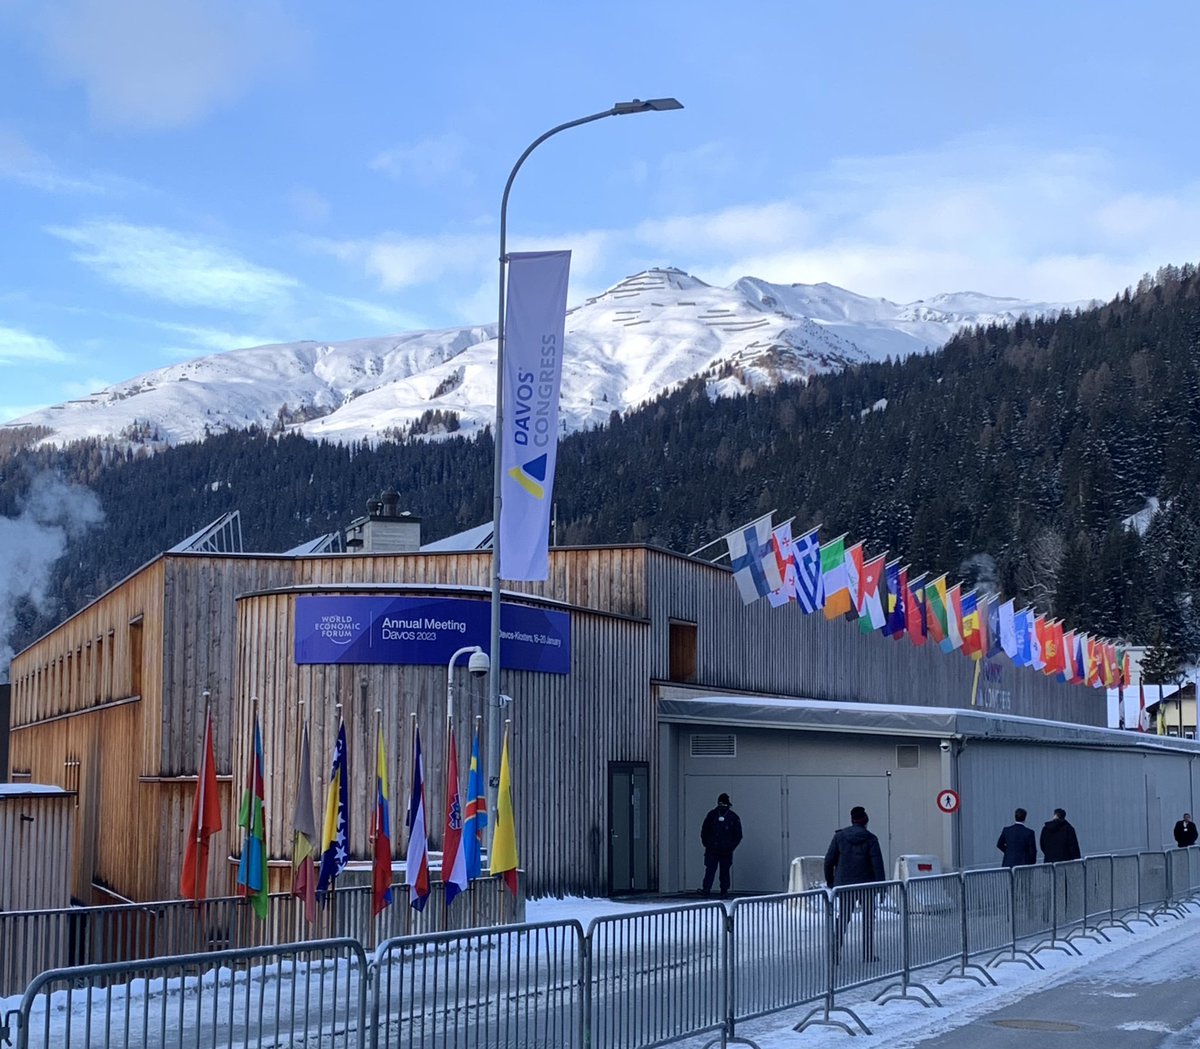 Closing reflections from #Davos2023: 🔹Discussions focused on “HOW” not “why” 🔹U.S. IRA Act already changing financial and material flows 🔹Climate & nature focus on data and finance 🔹Too little on tackling inequality 🔹ESG = crickets Corporate accountability key into #COP28!